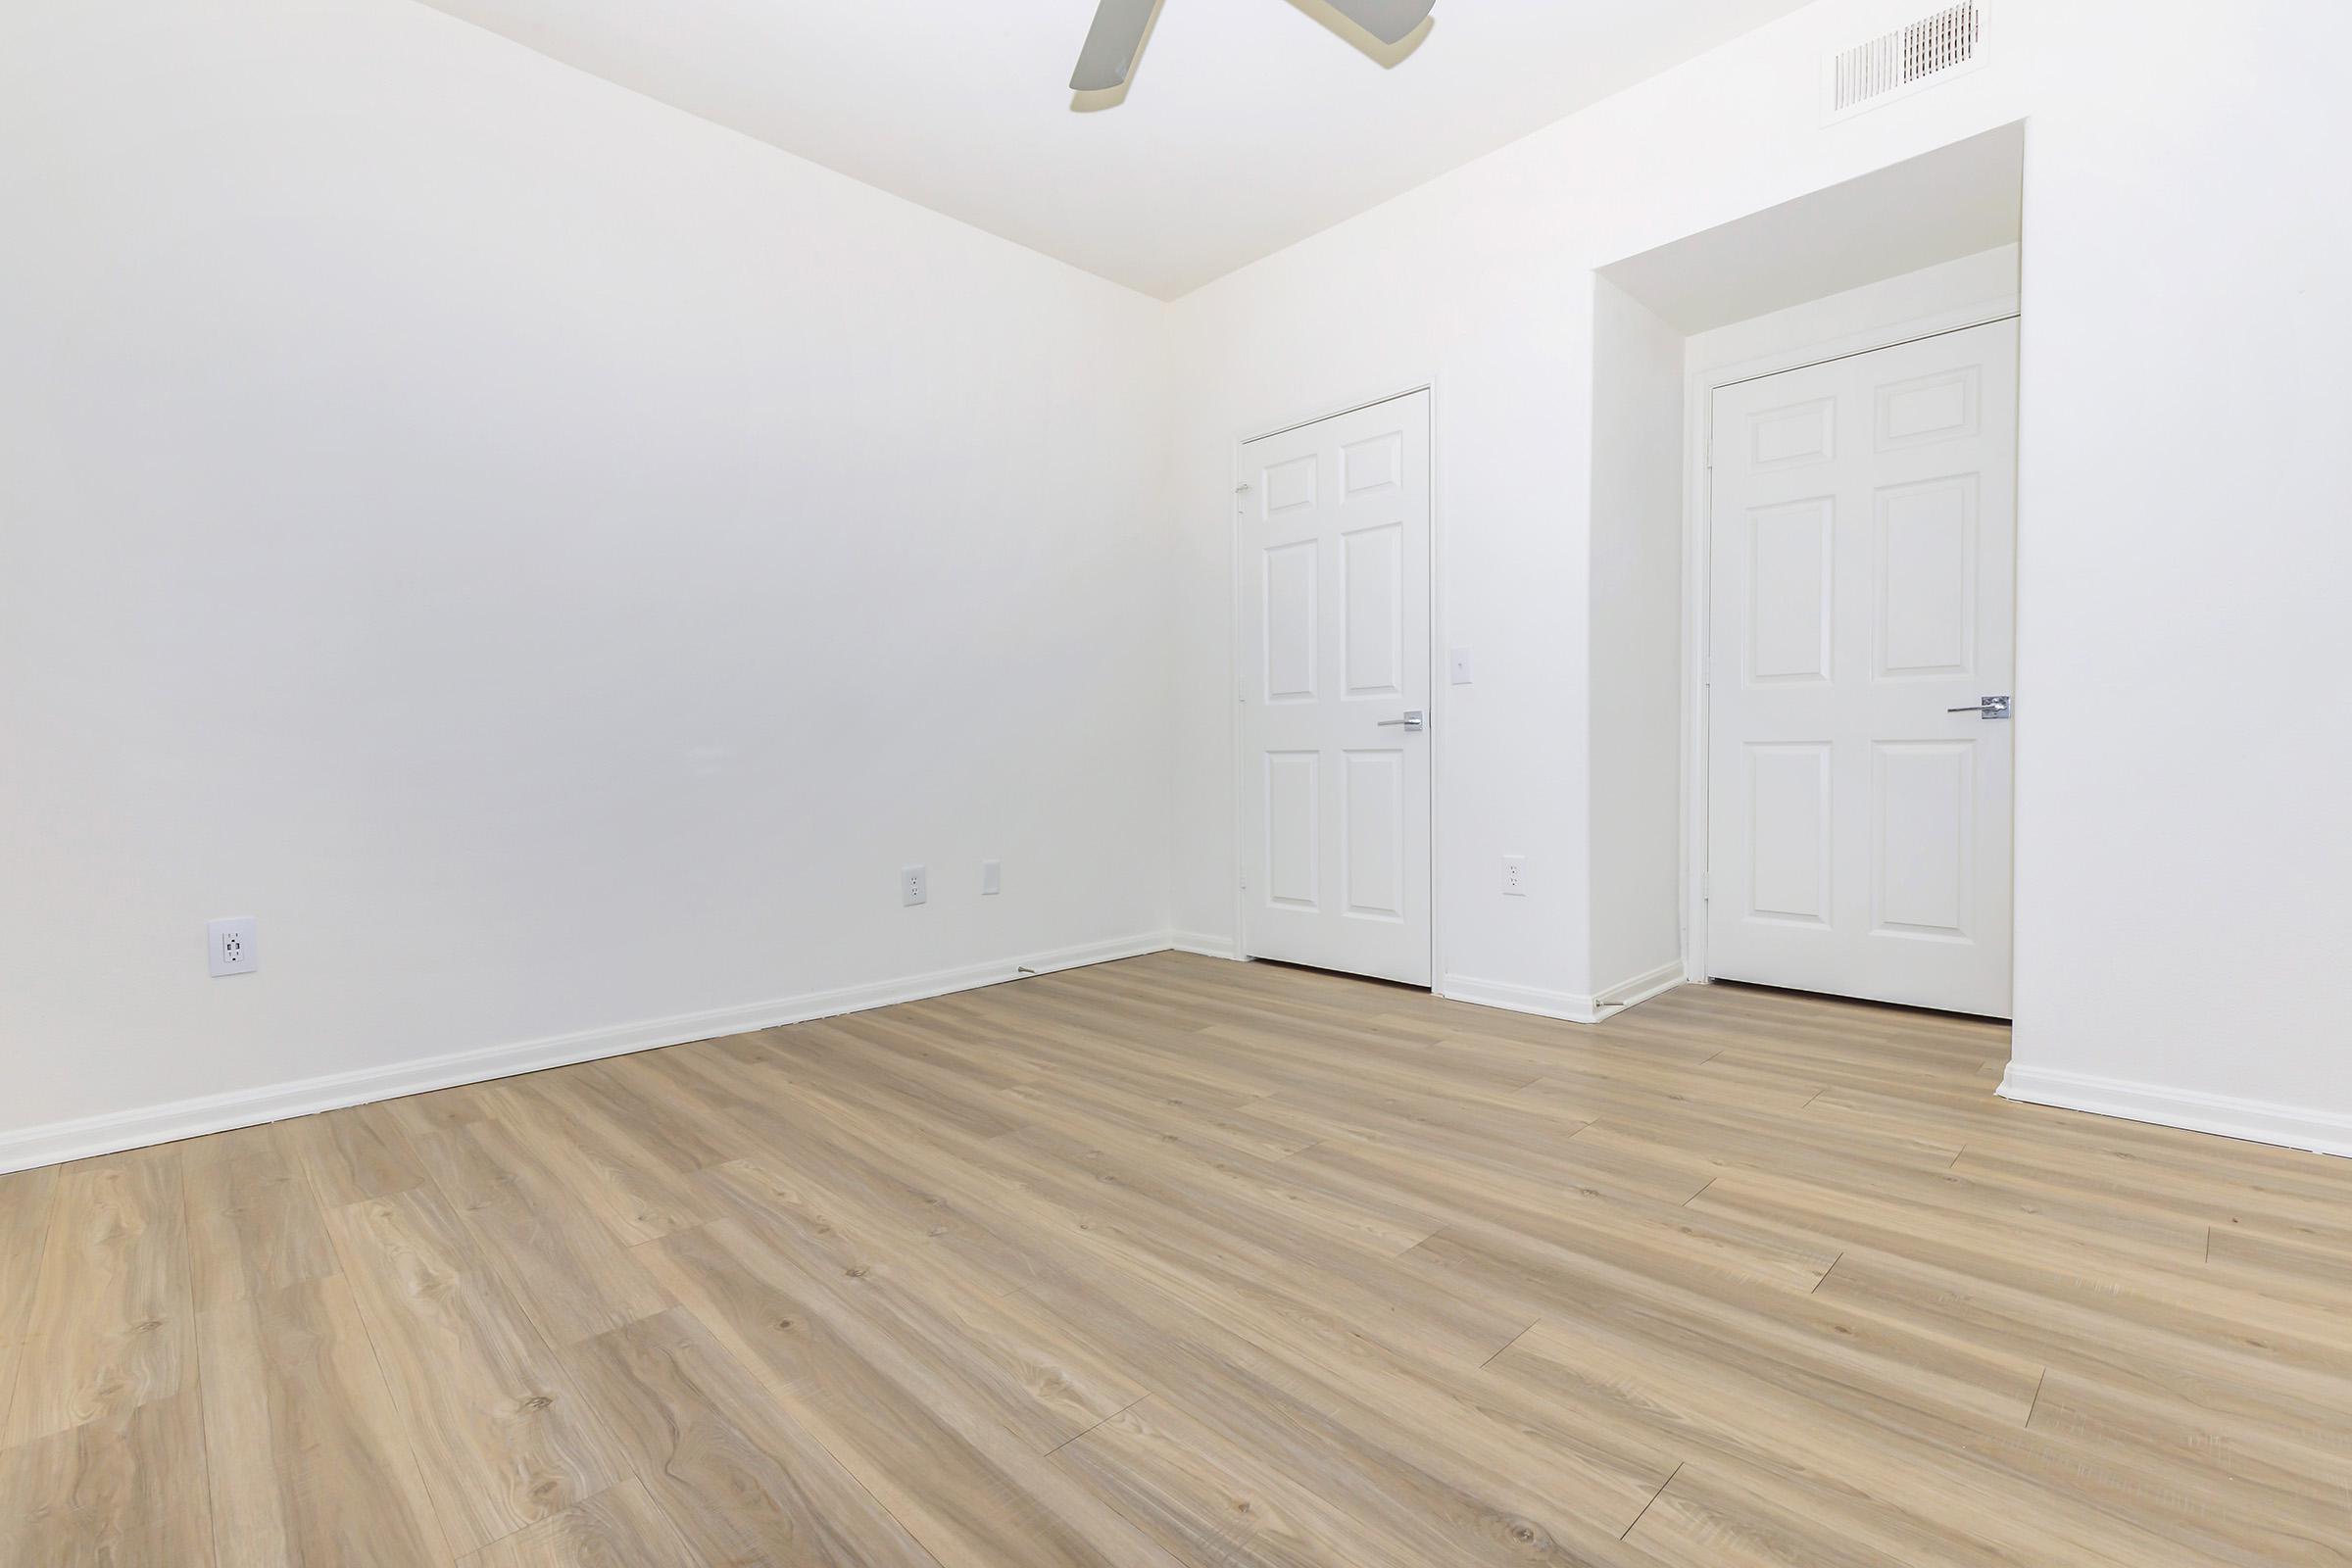 HANDSOME HARDWOOD FLOORING AVAILABLE